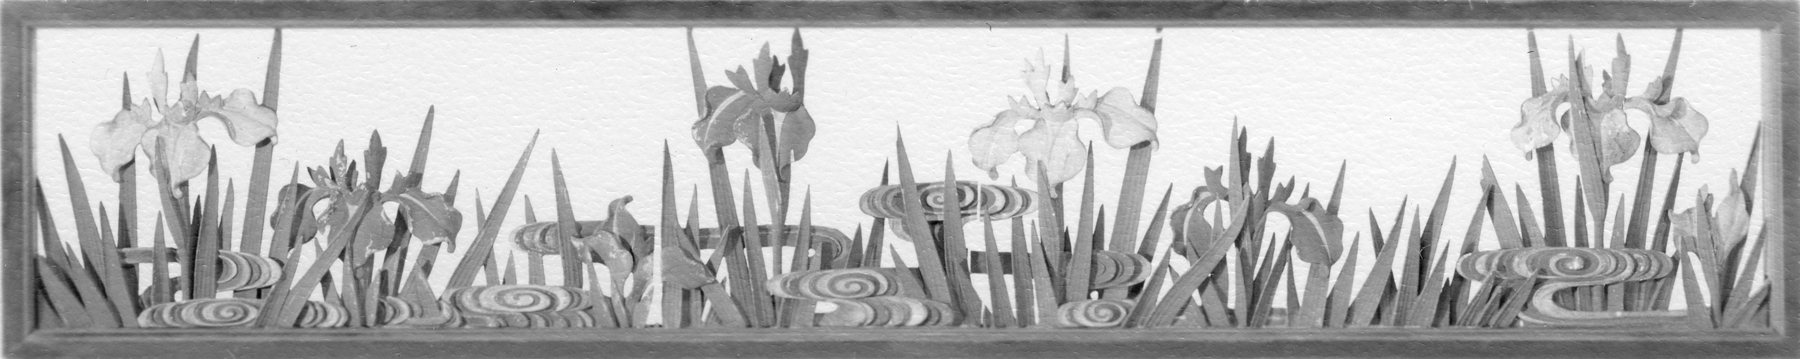 Image for Decorative Screen with Irises/ waves and watergrasses